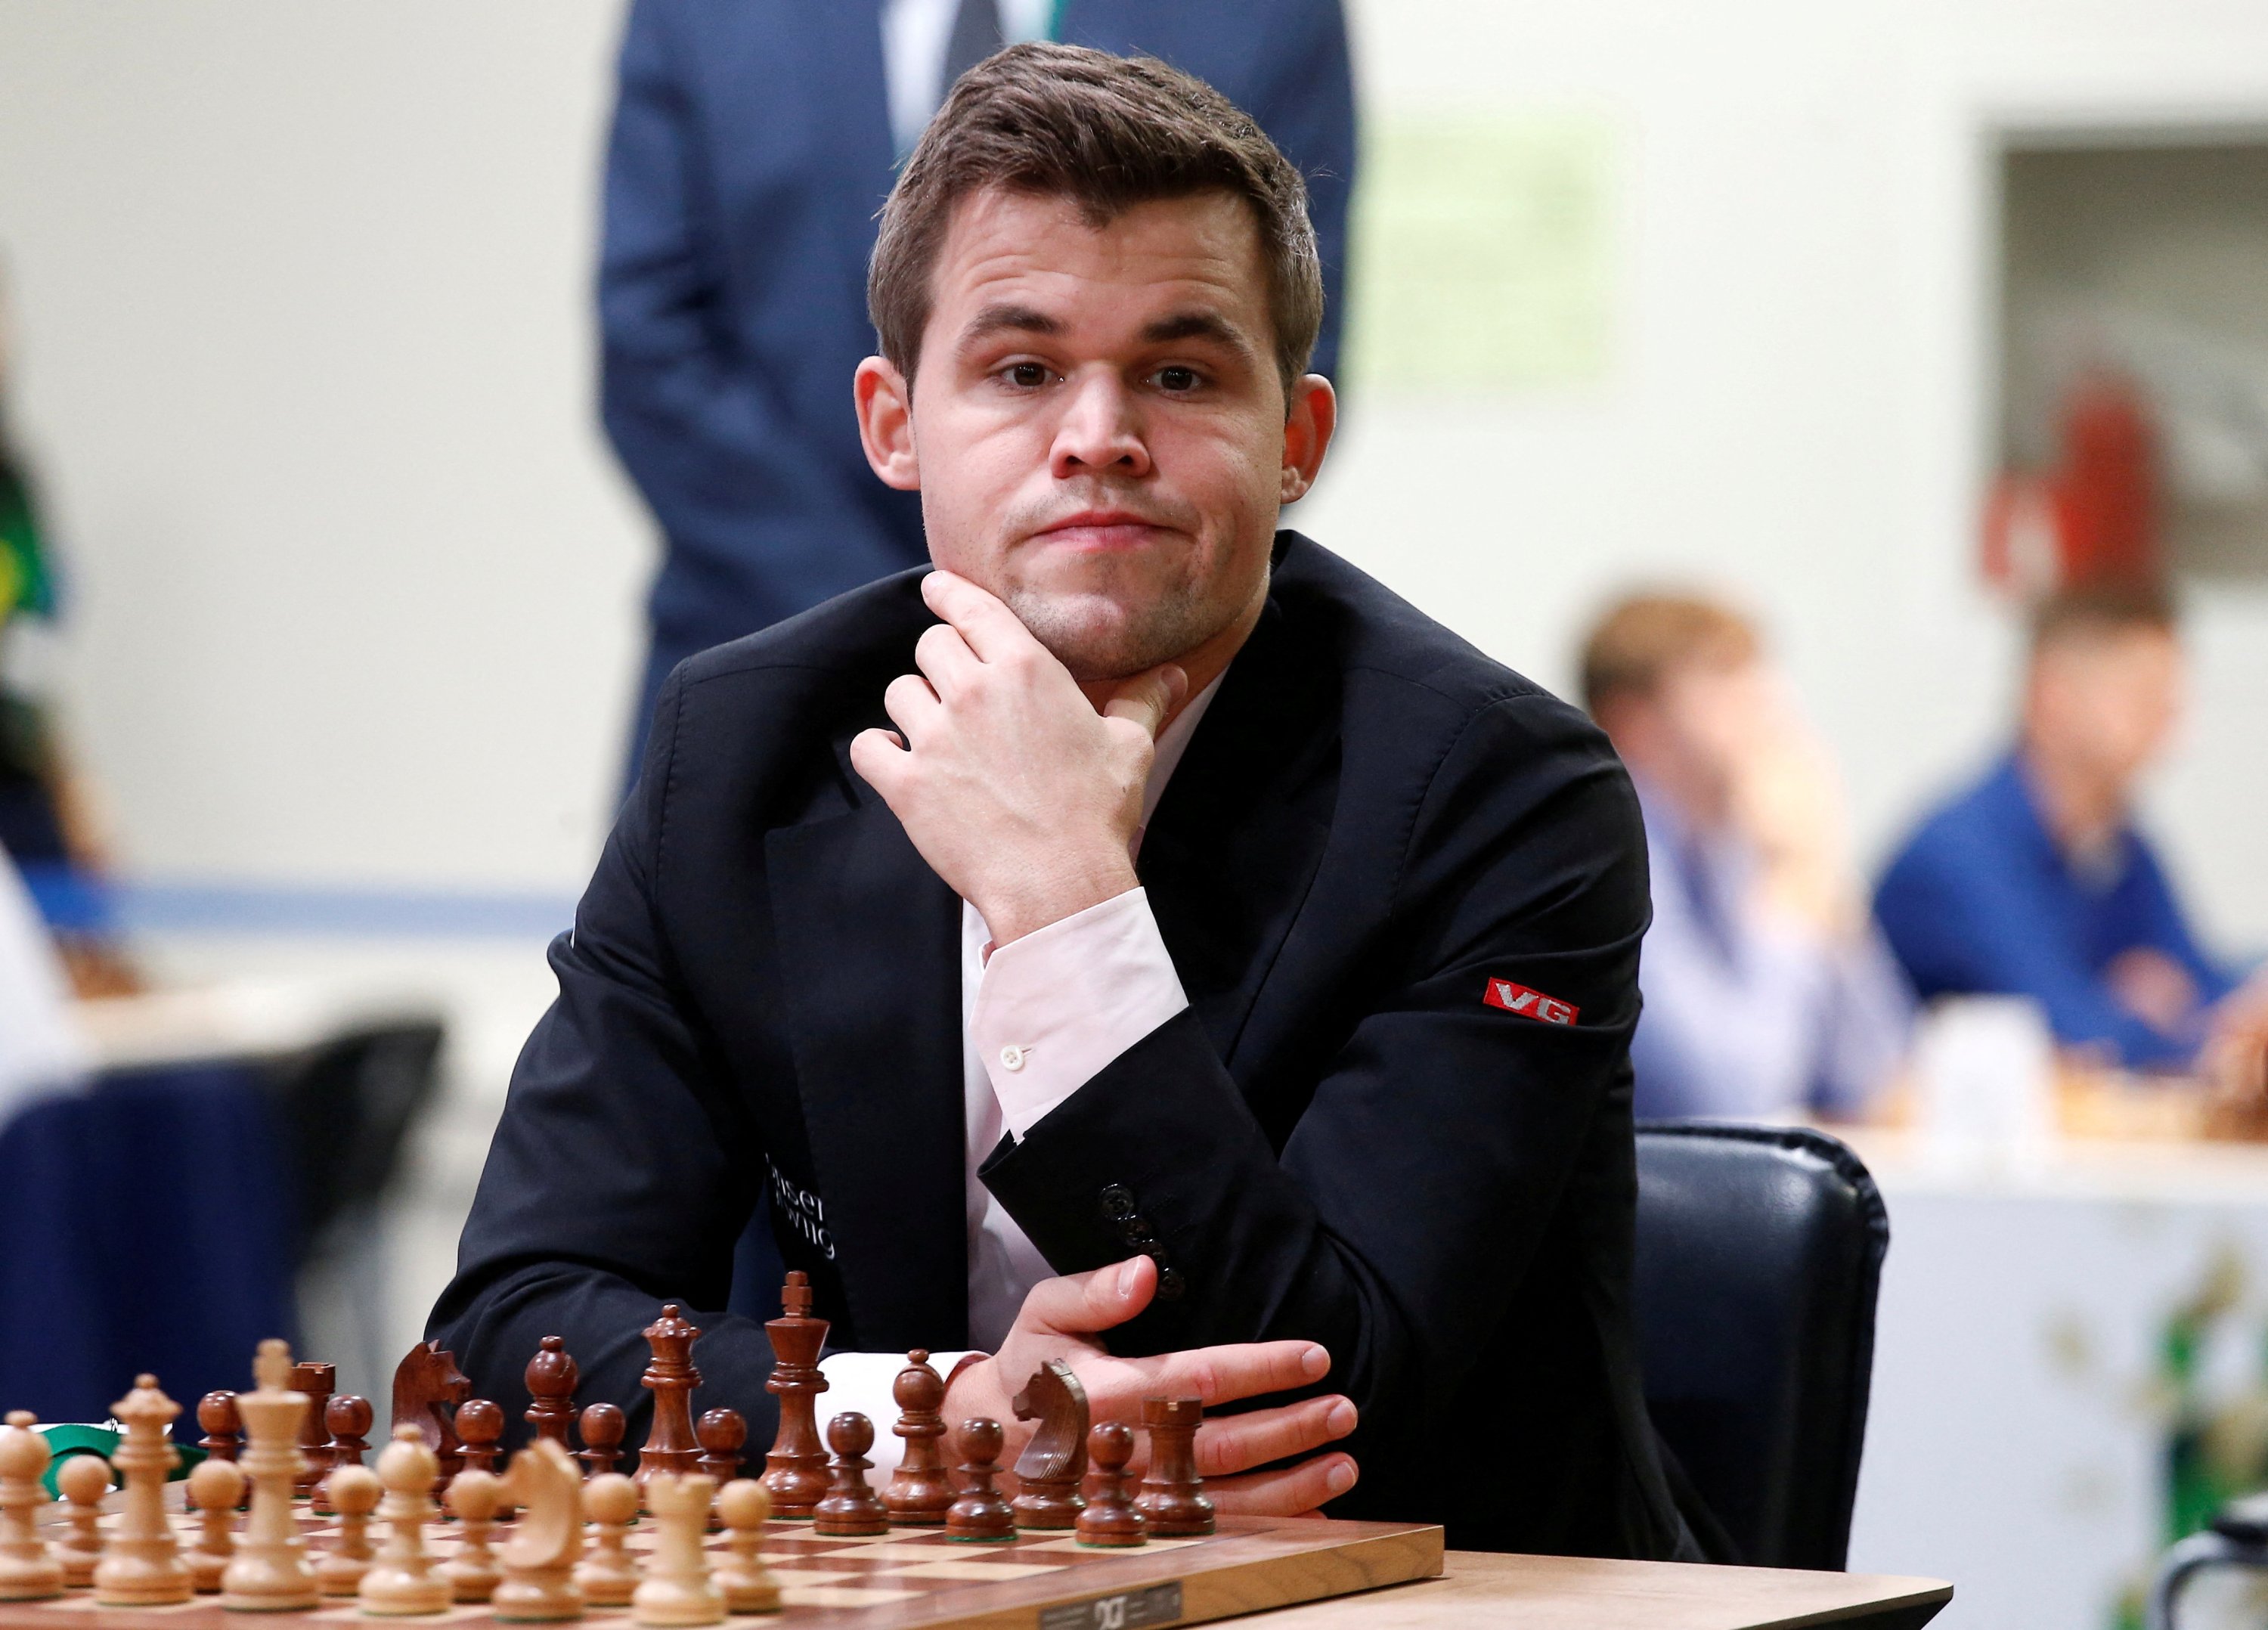 Carlsen's doubts over title defence leave chess facing uncertain future, Magnus Carlsen